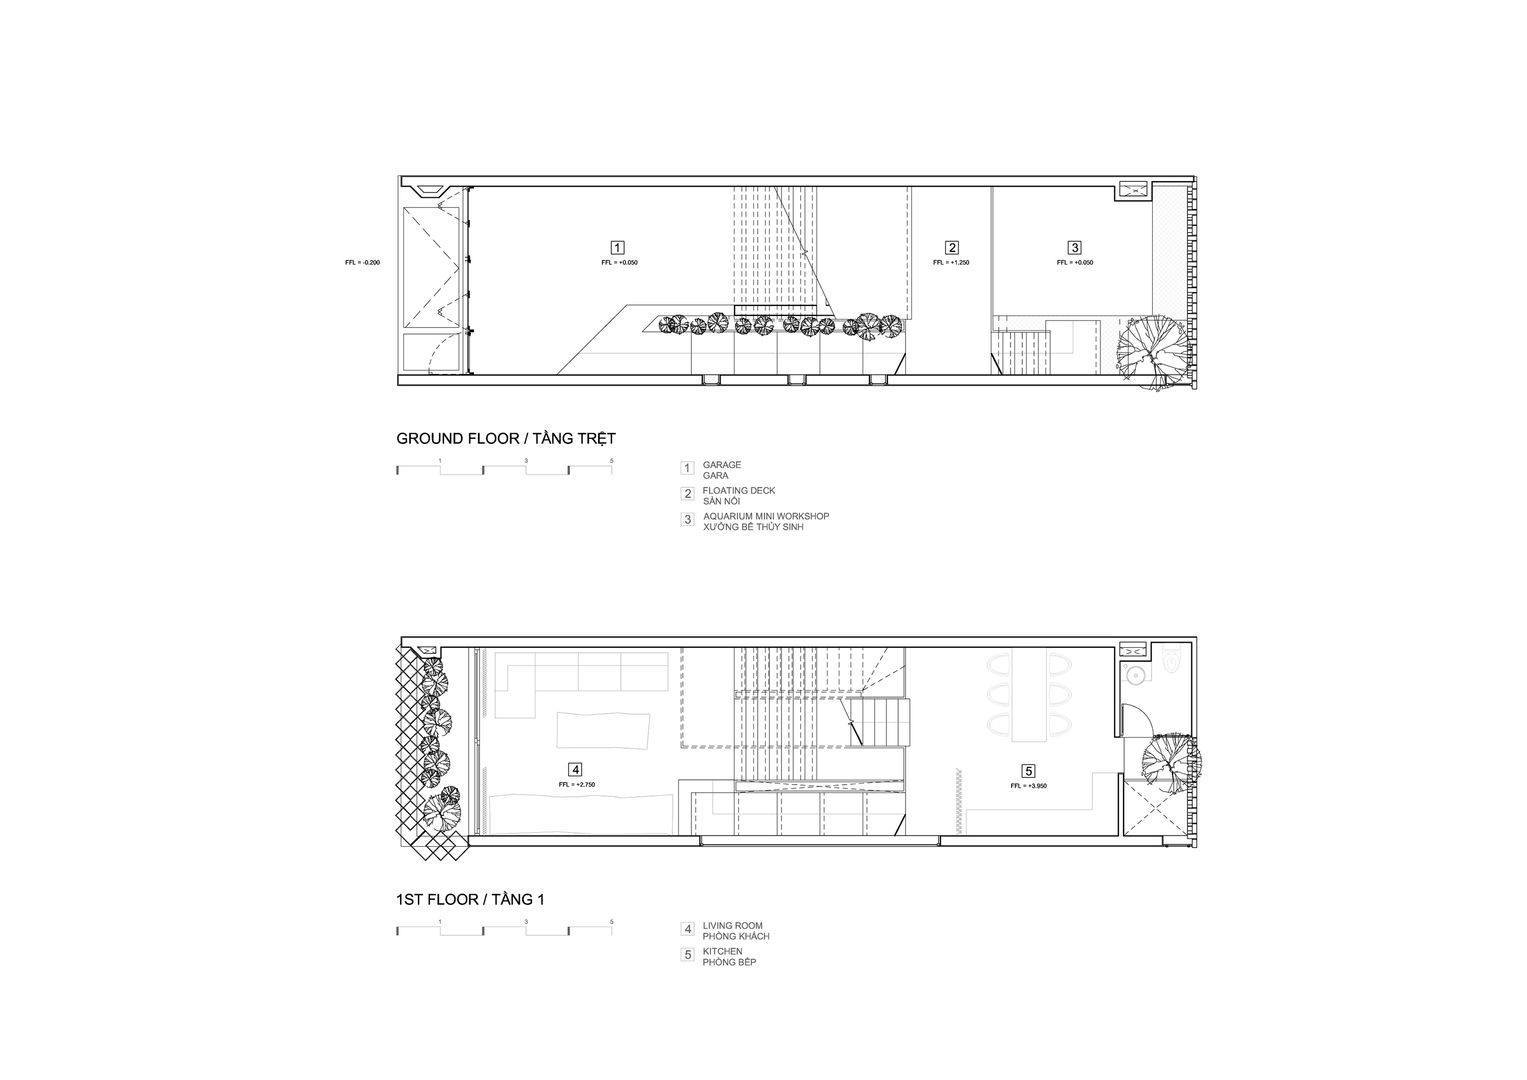 STH - Stairhouse, deline architecture consultancy & construction deline architecture consultancy & construction